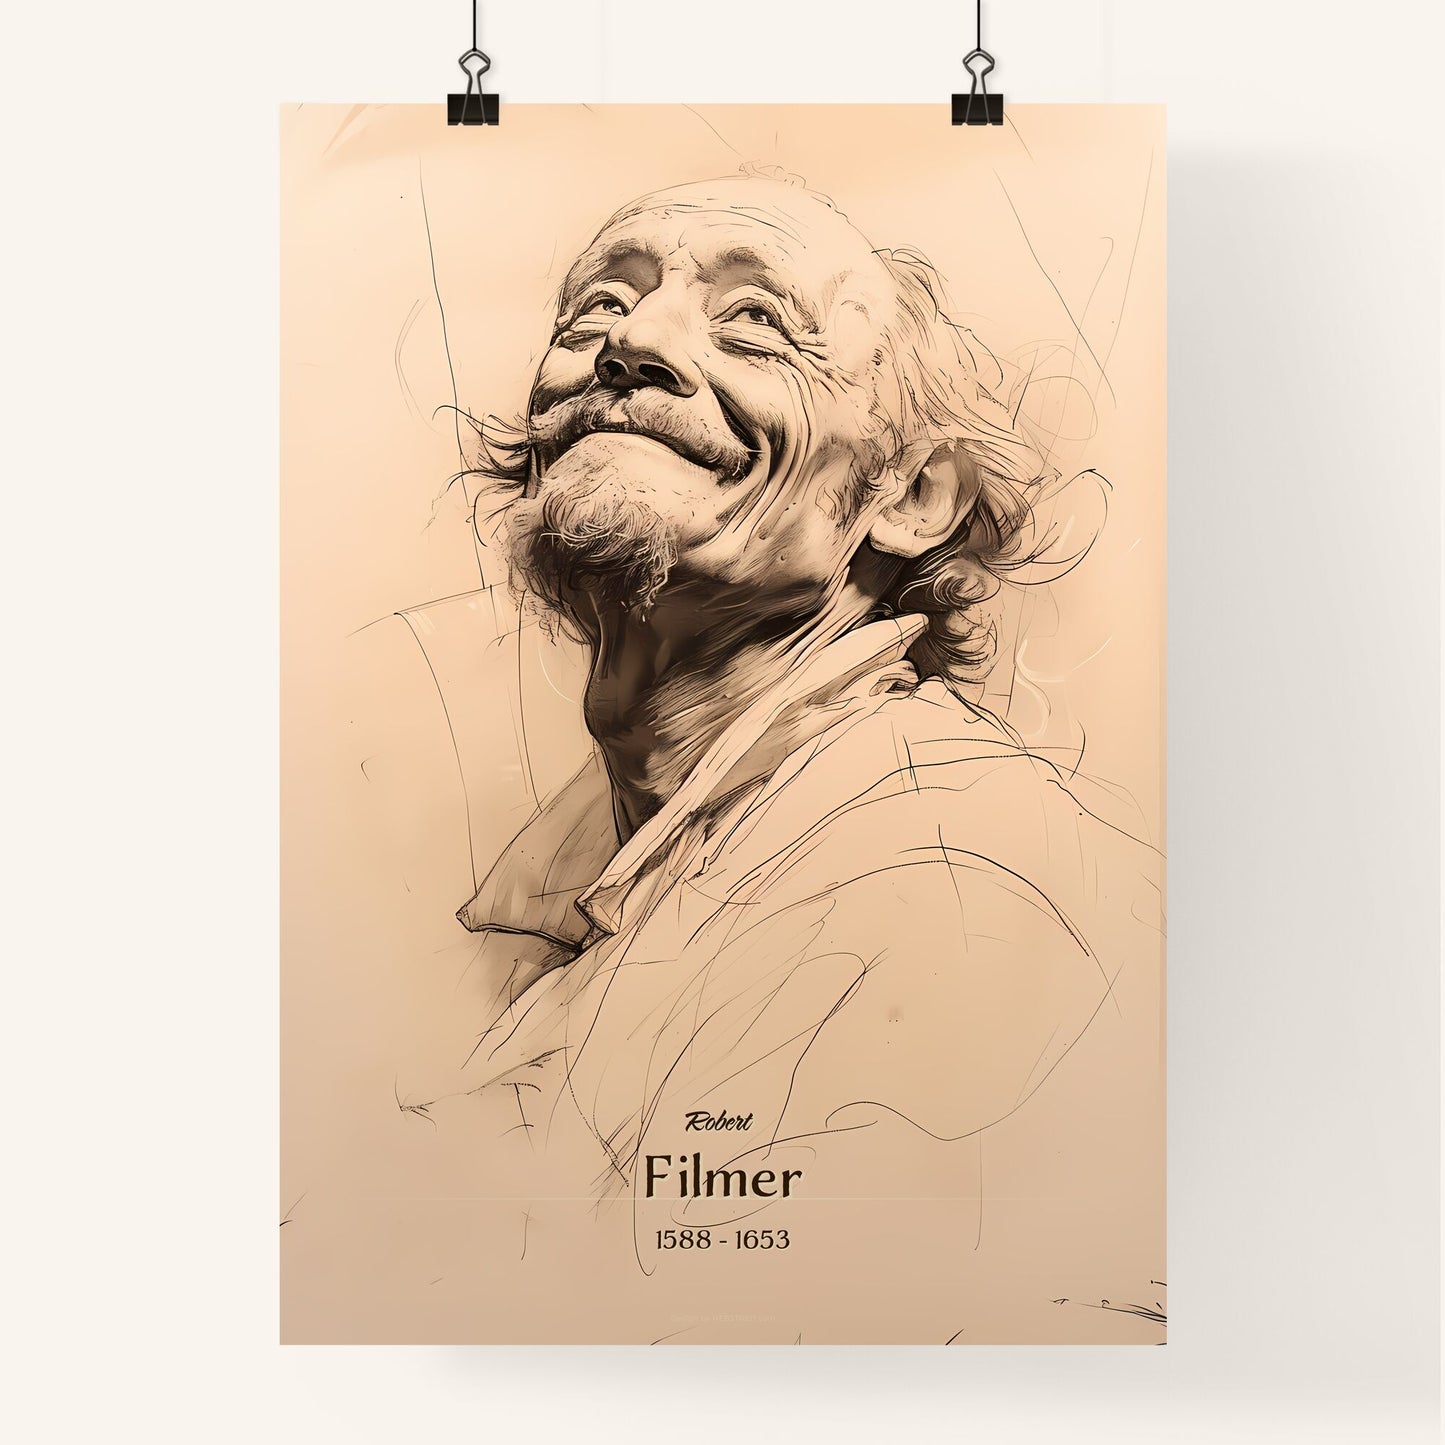 Robert, Filmer, 1588 - 1653, A Poster of a drawing of a man smiling Default Title